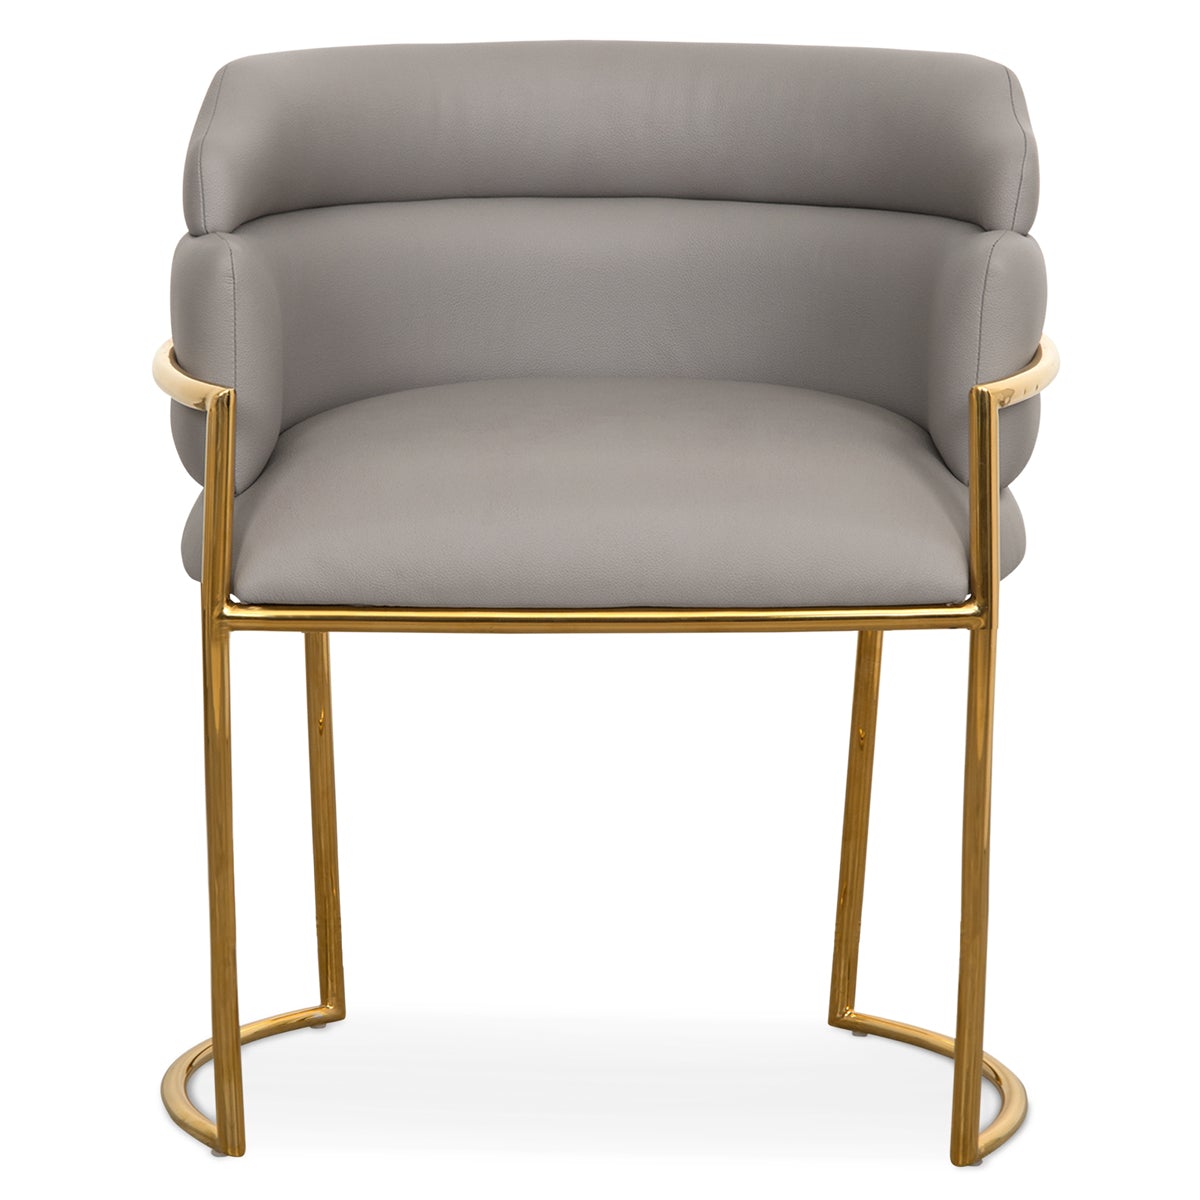 Buenos Aires Dining Chair - ModShop1.com